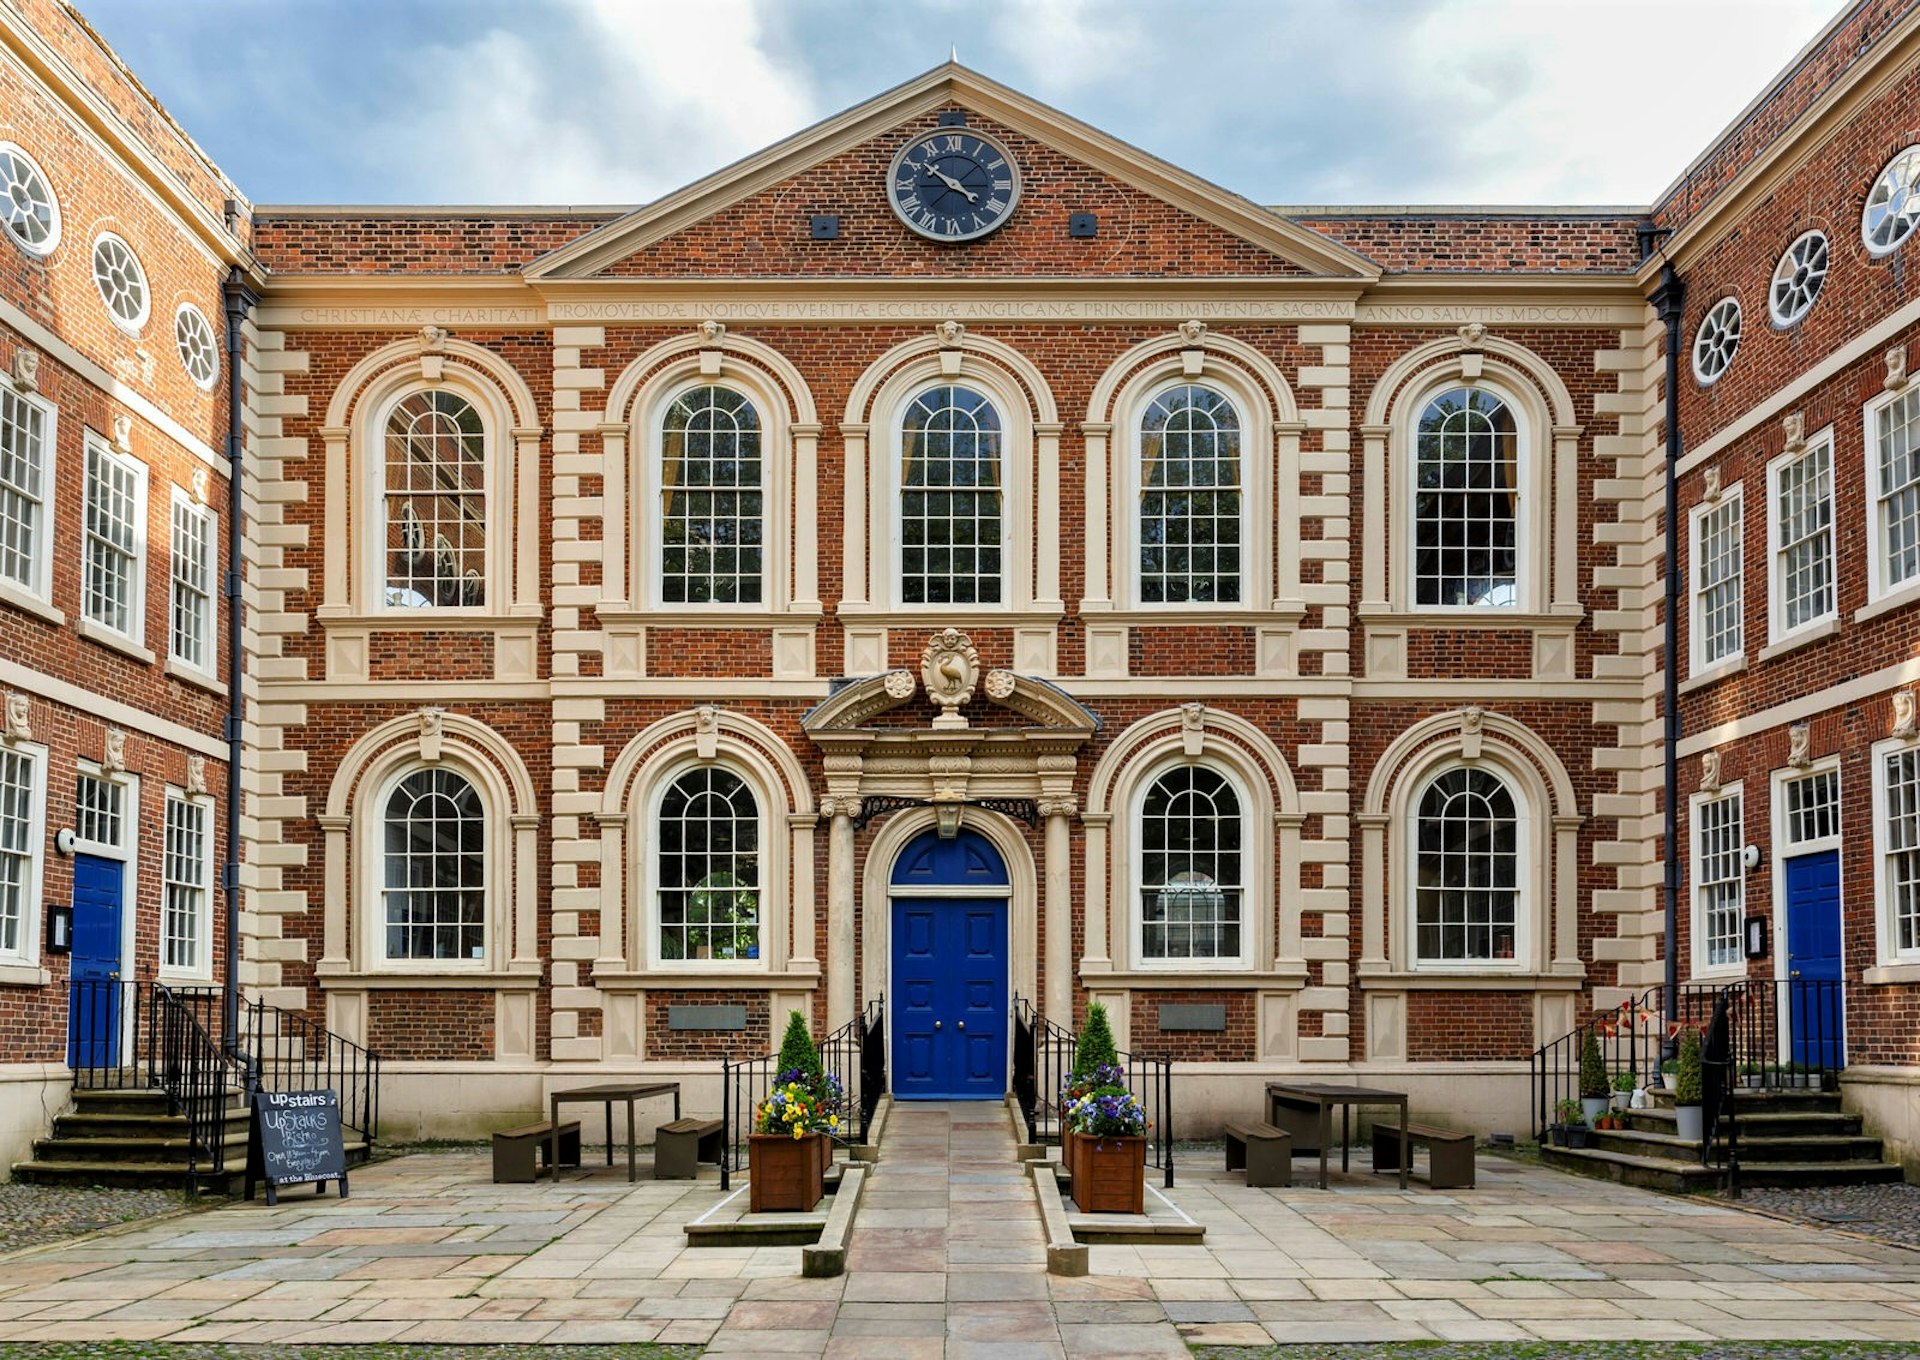 Bluecoat Chambers, Liverpool. The red-brick building has cream highlights and startling blue doors.